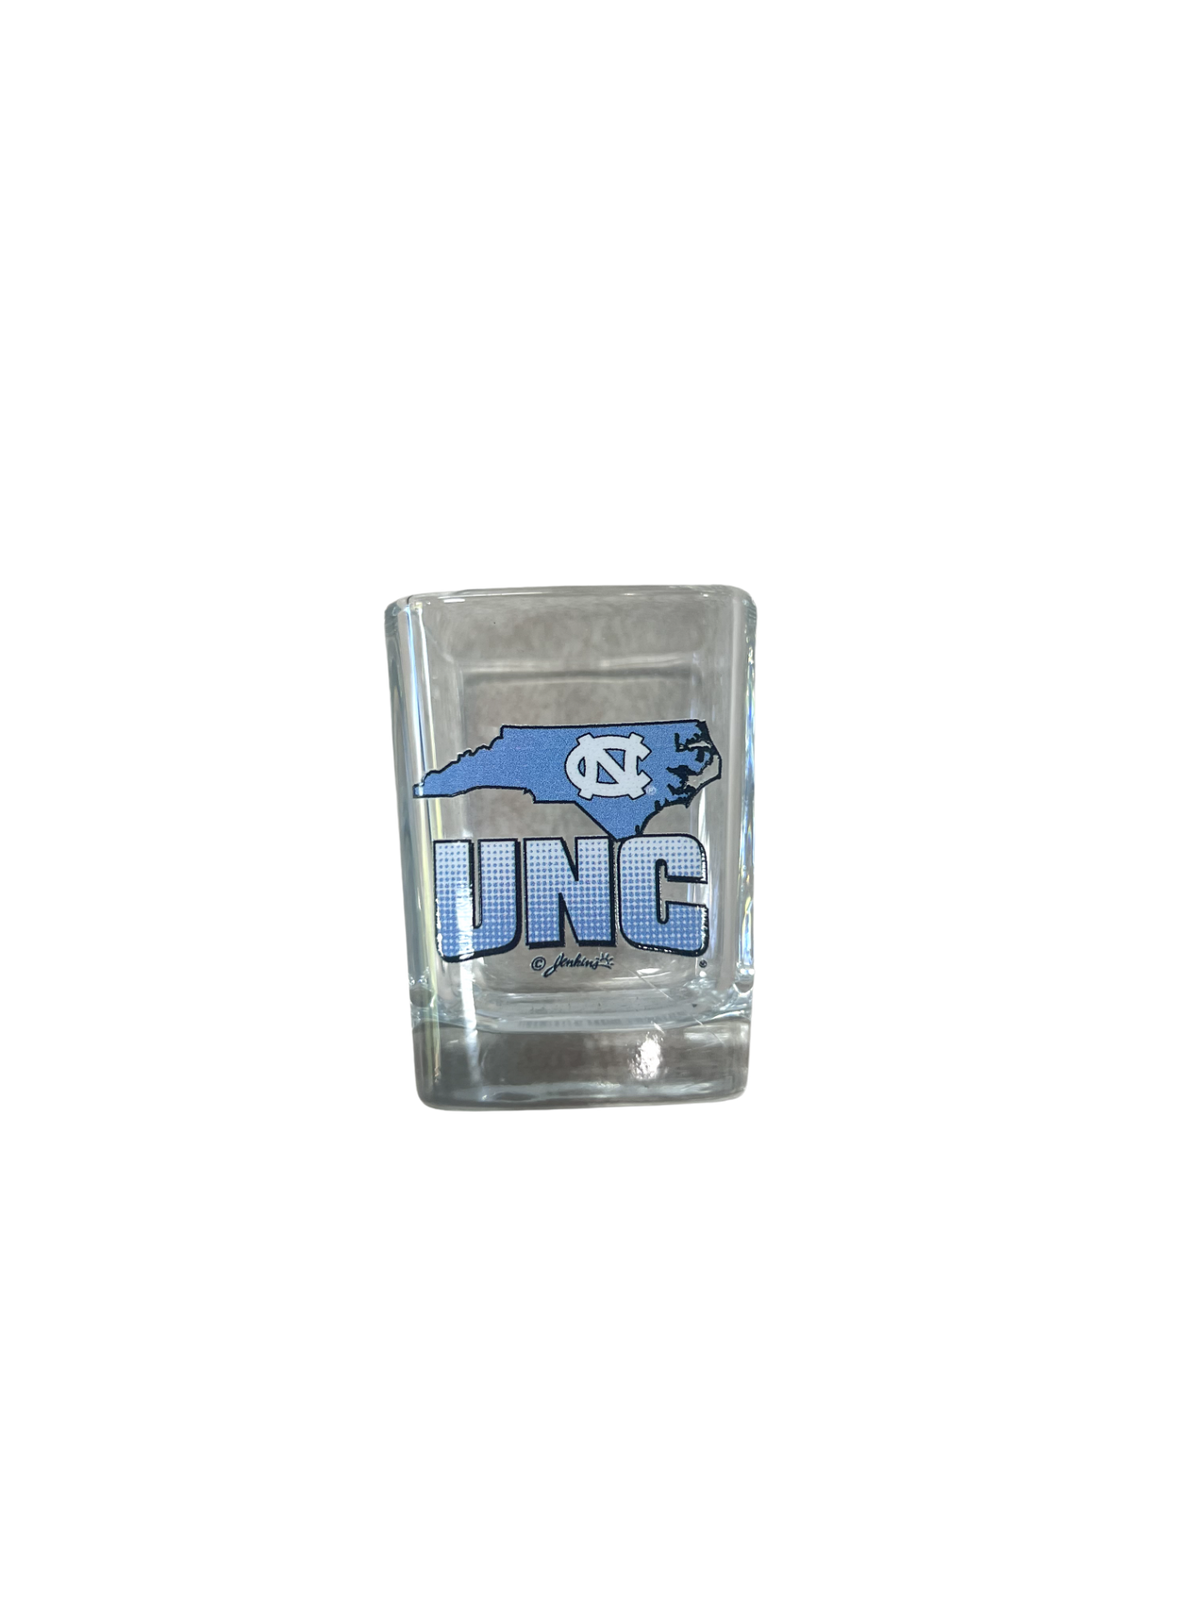 UNC w/ State Outline Square Shot Glass